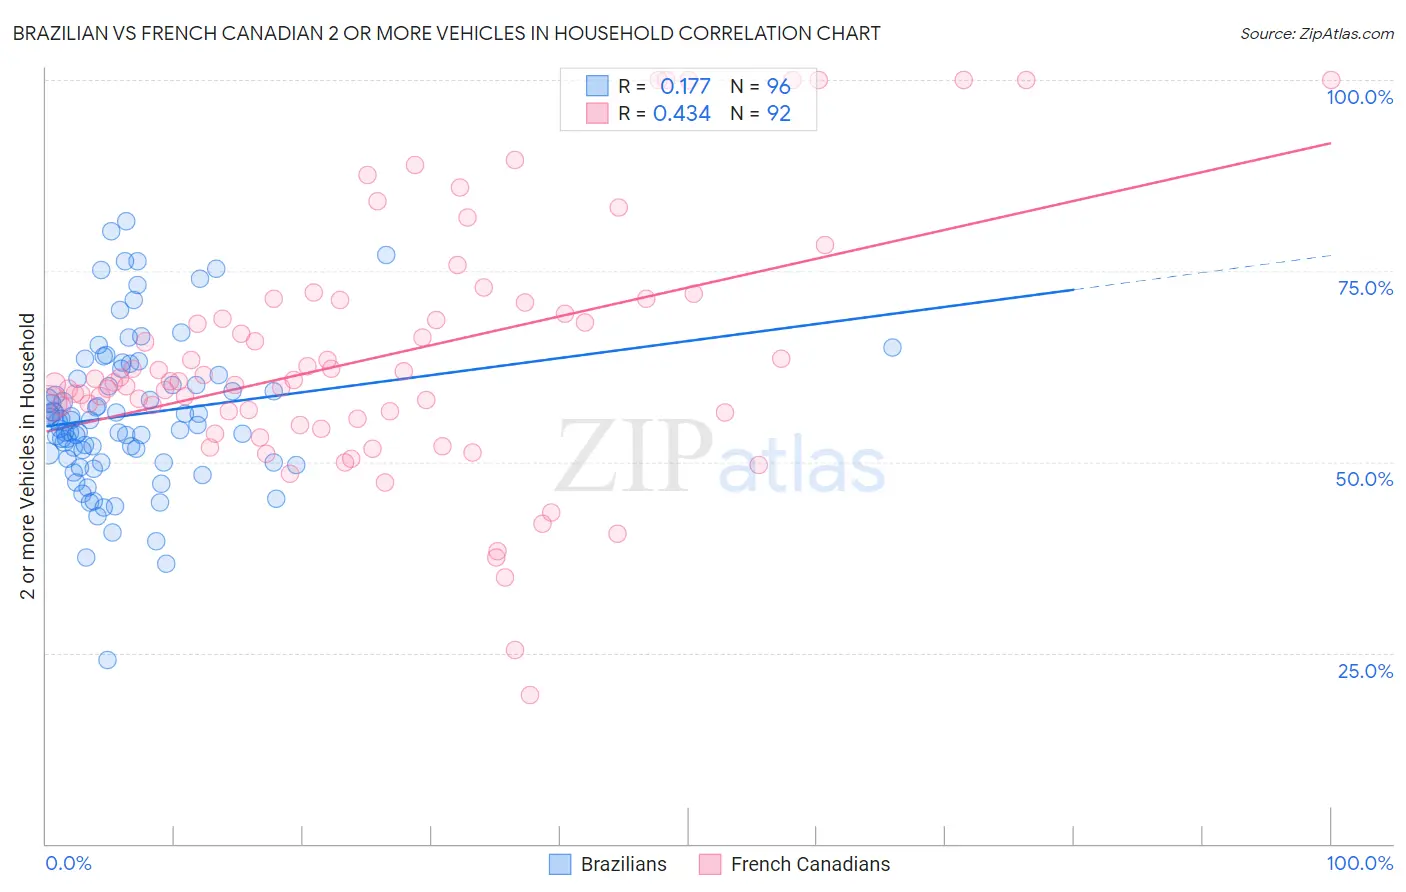 Brazilian vs French Canadian 2 or more Vehicles in Household